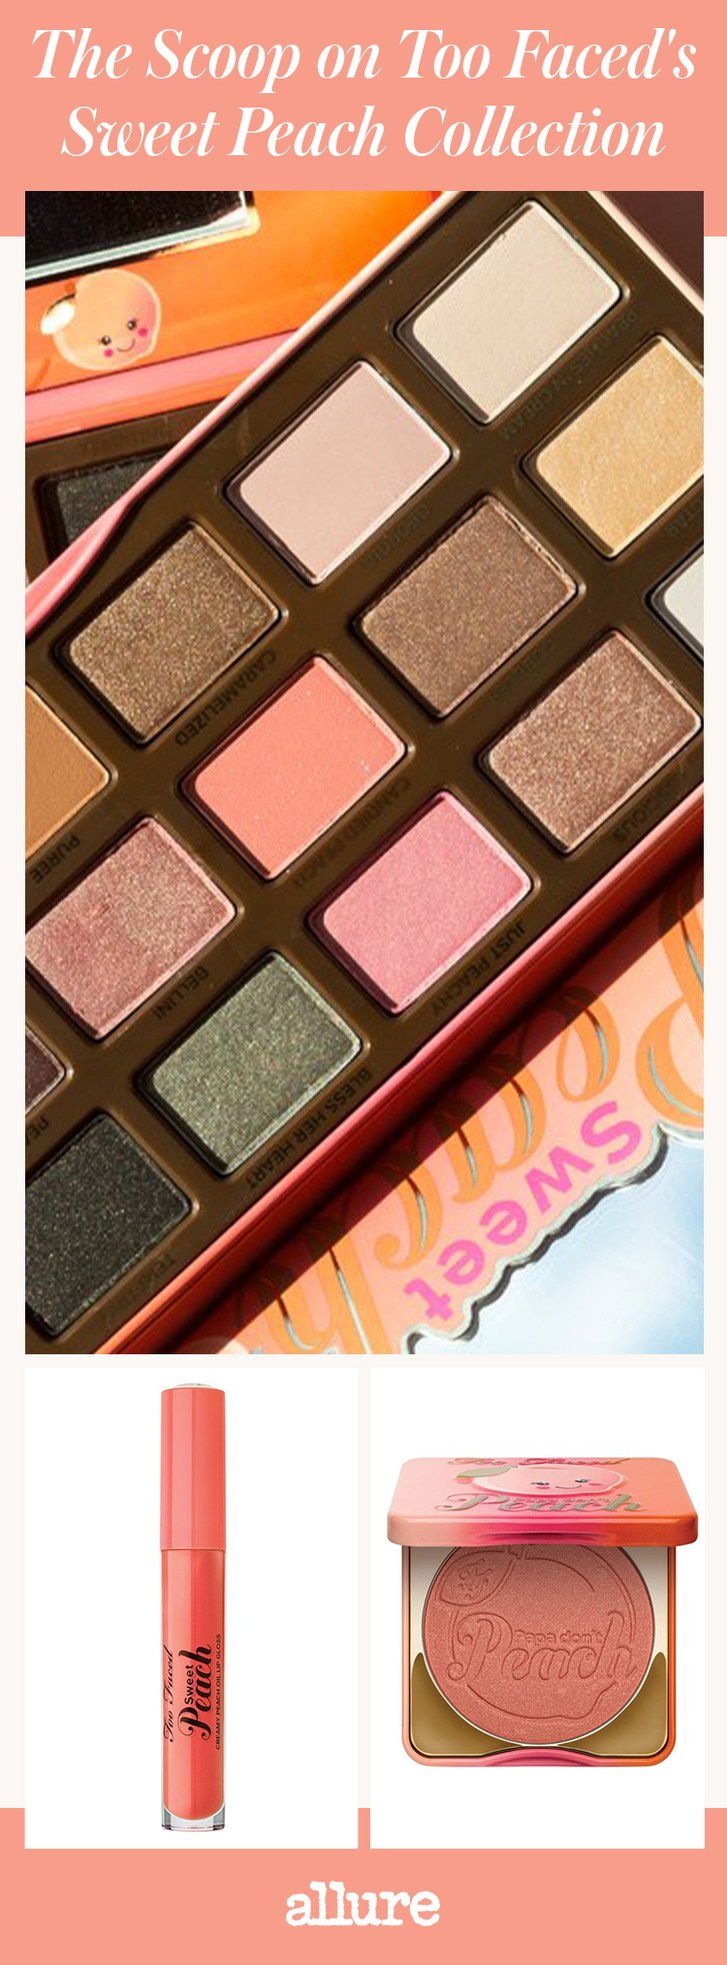 Тхе Too Faced Sweet Peach Collection: Everything You Need to Know About the New Products